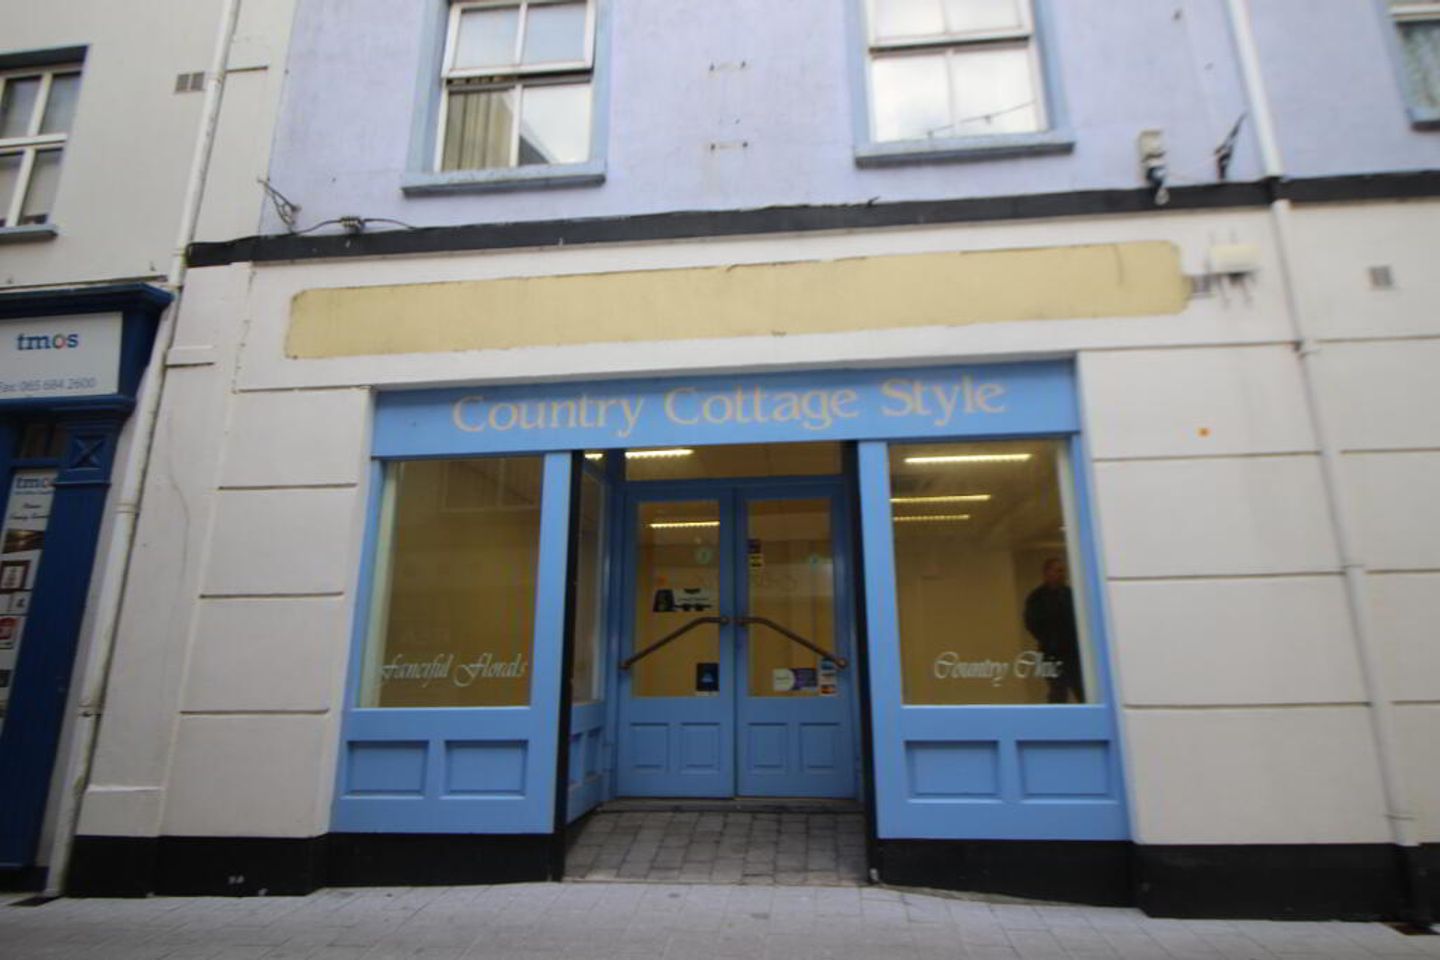 39-41 Parnell Street, Ennis, Co. Clare